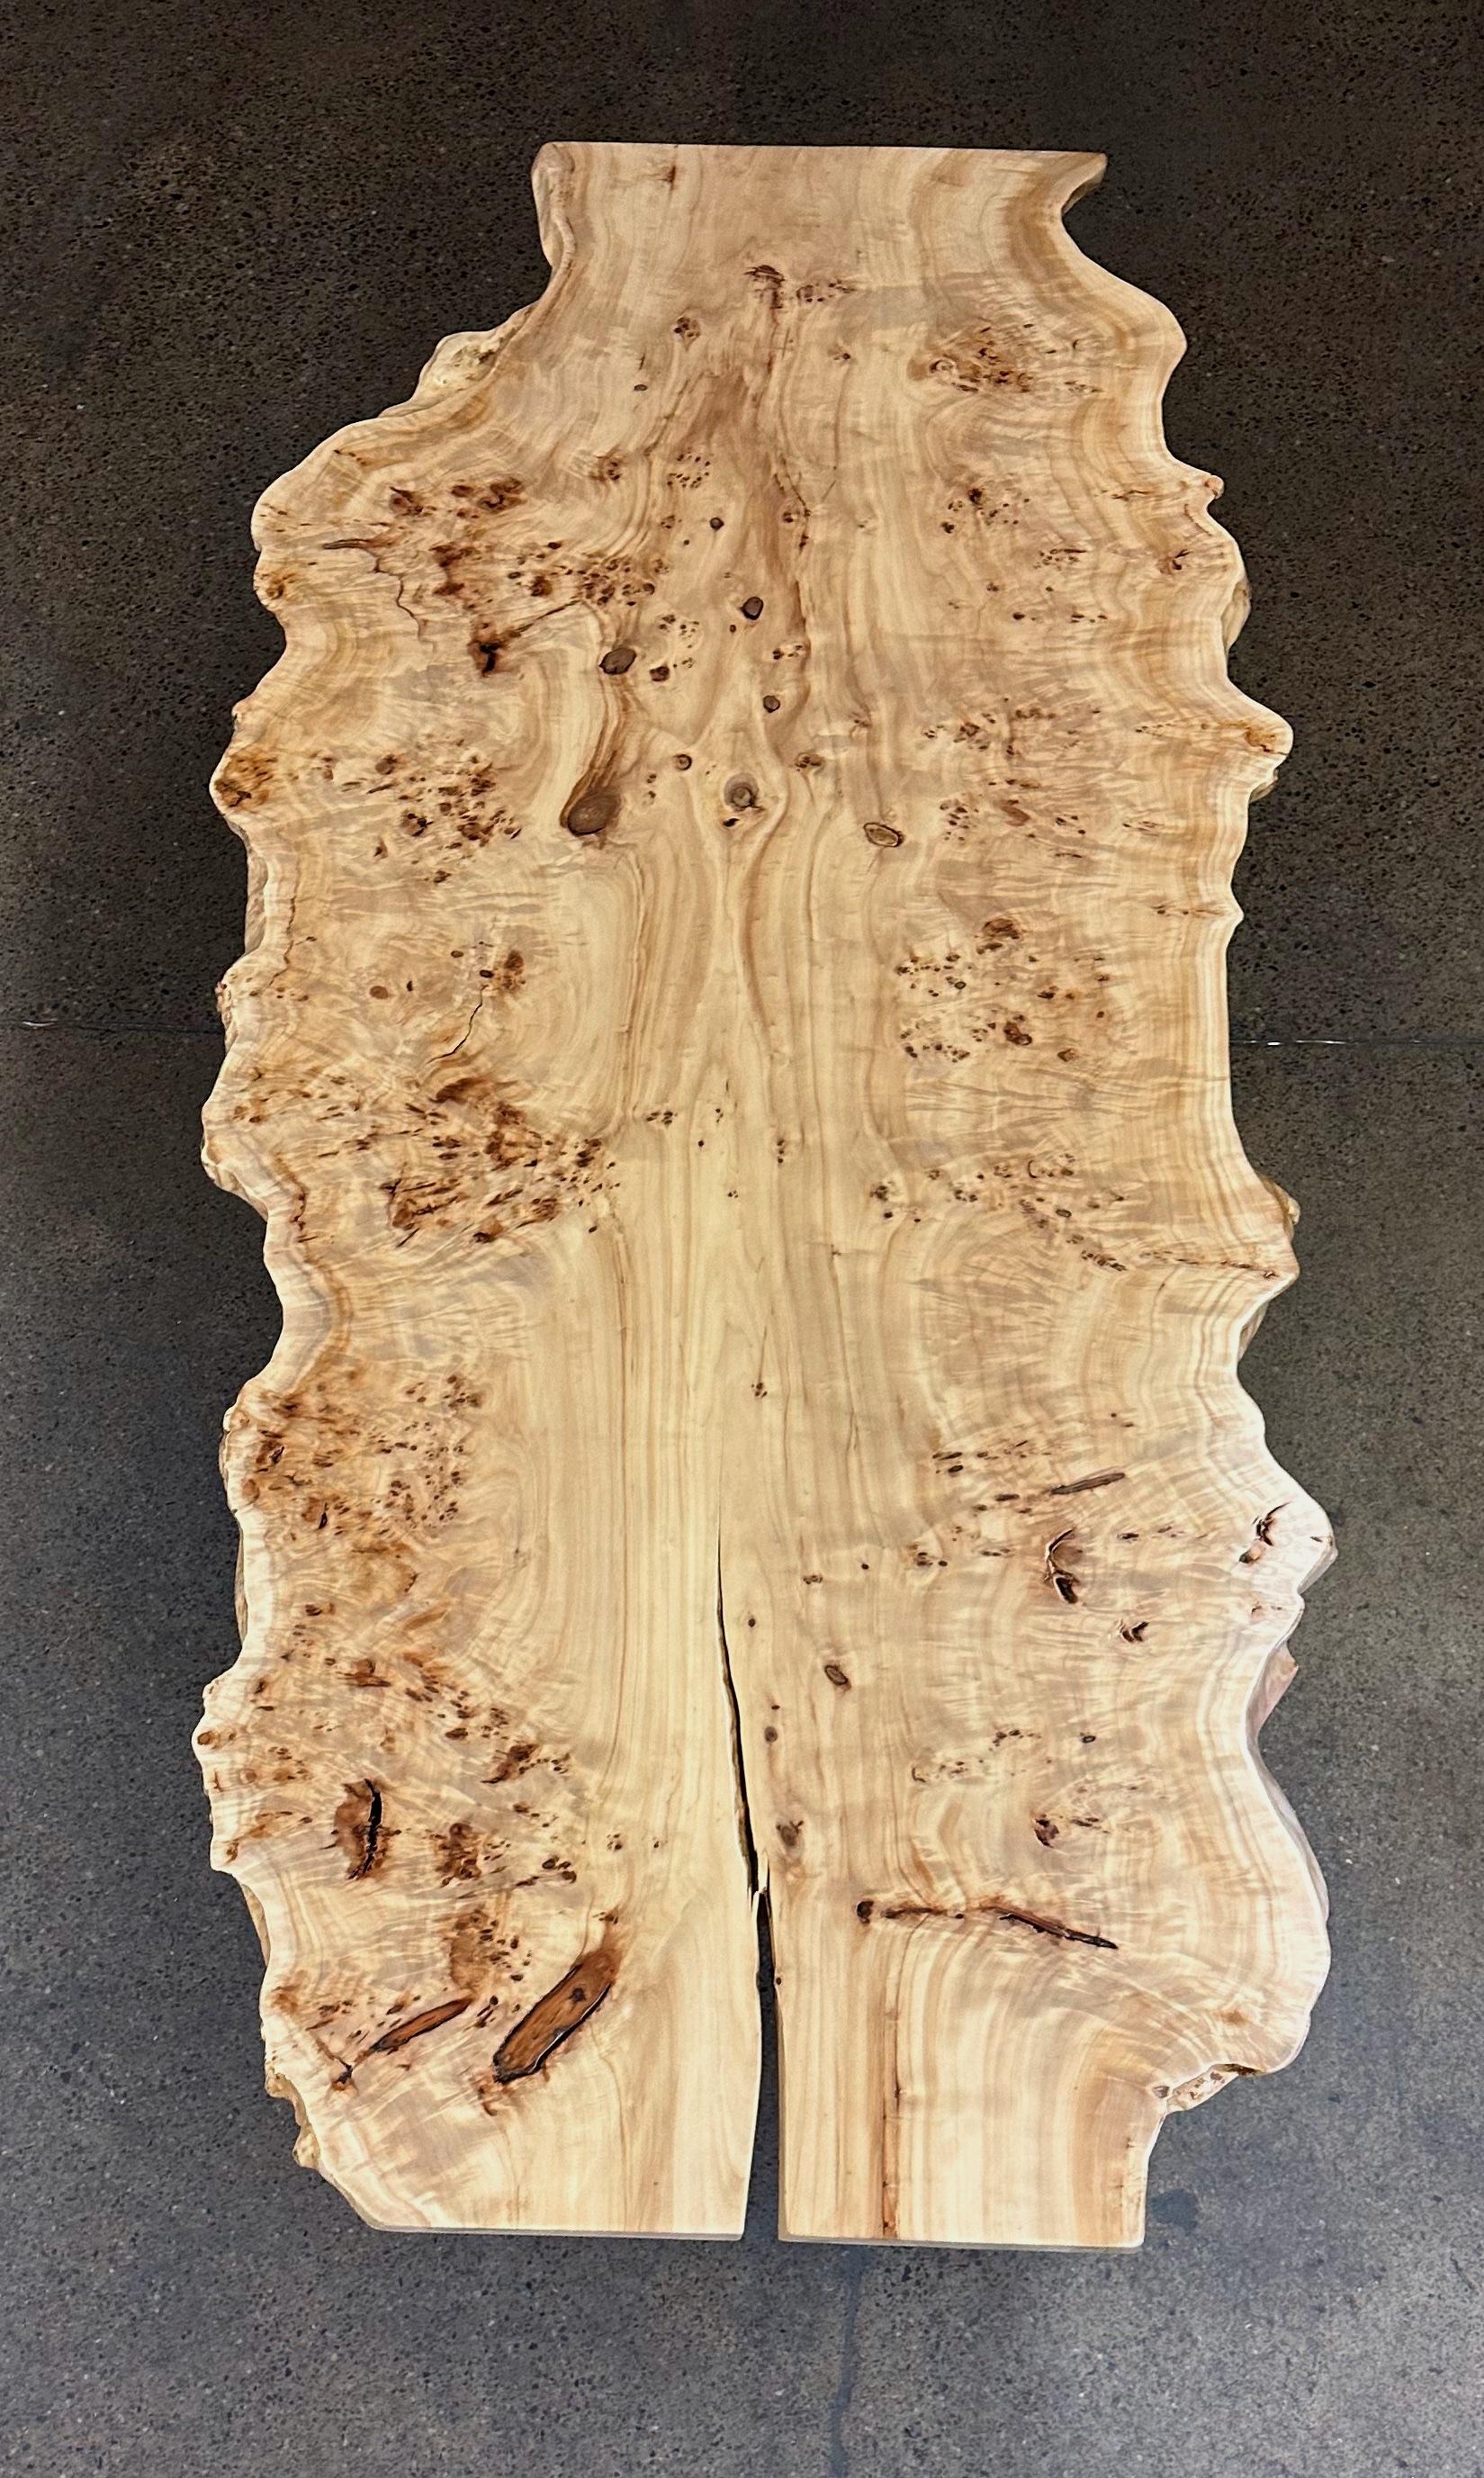 This was our first time hearing of mappa burl - our client came to us with that name asking if we could find a slab to make a dining table for them and after digging into a few of our suppliers, we came up with this spectacular piece. Raw edge slab